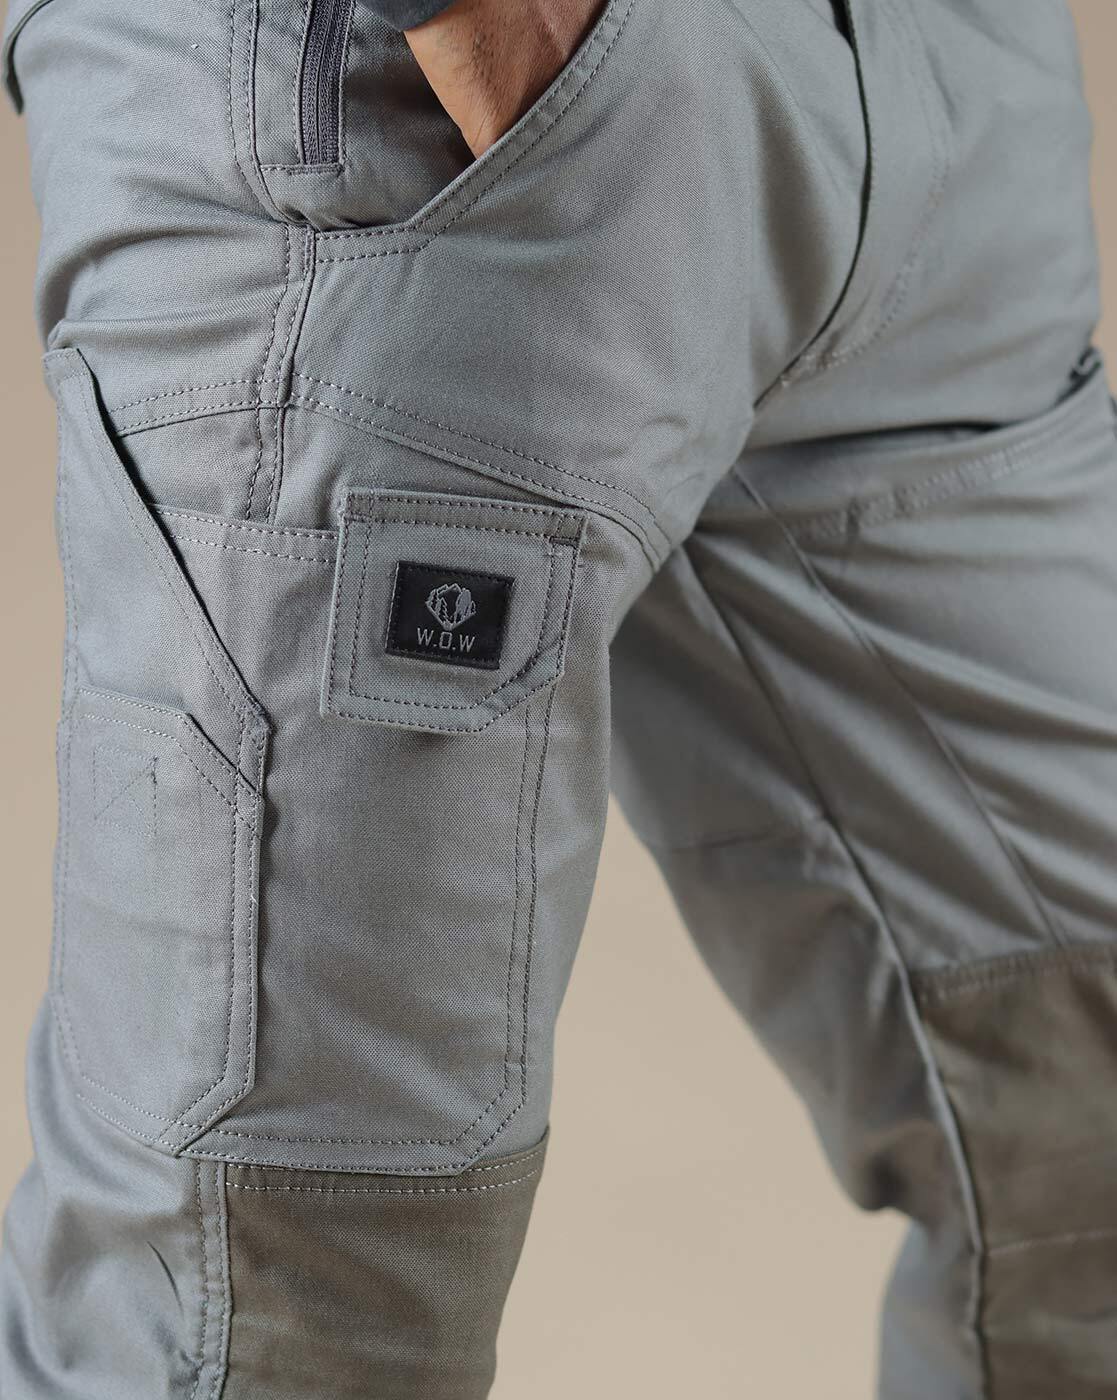 Tactical Trousers for Men in India: Cargo, Military, Waterproof Pants